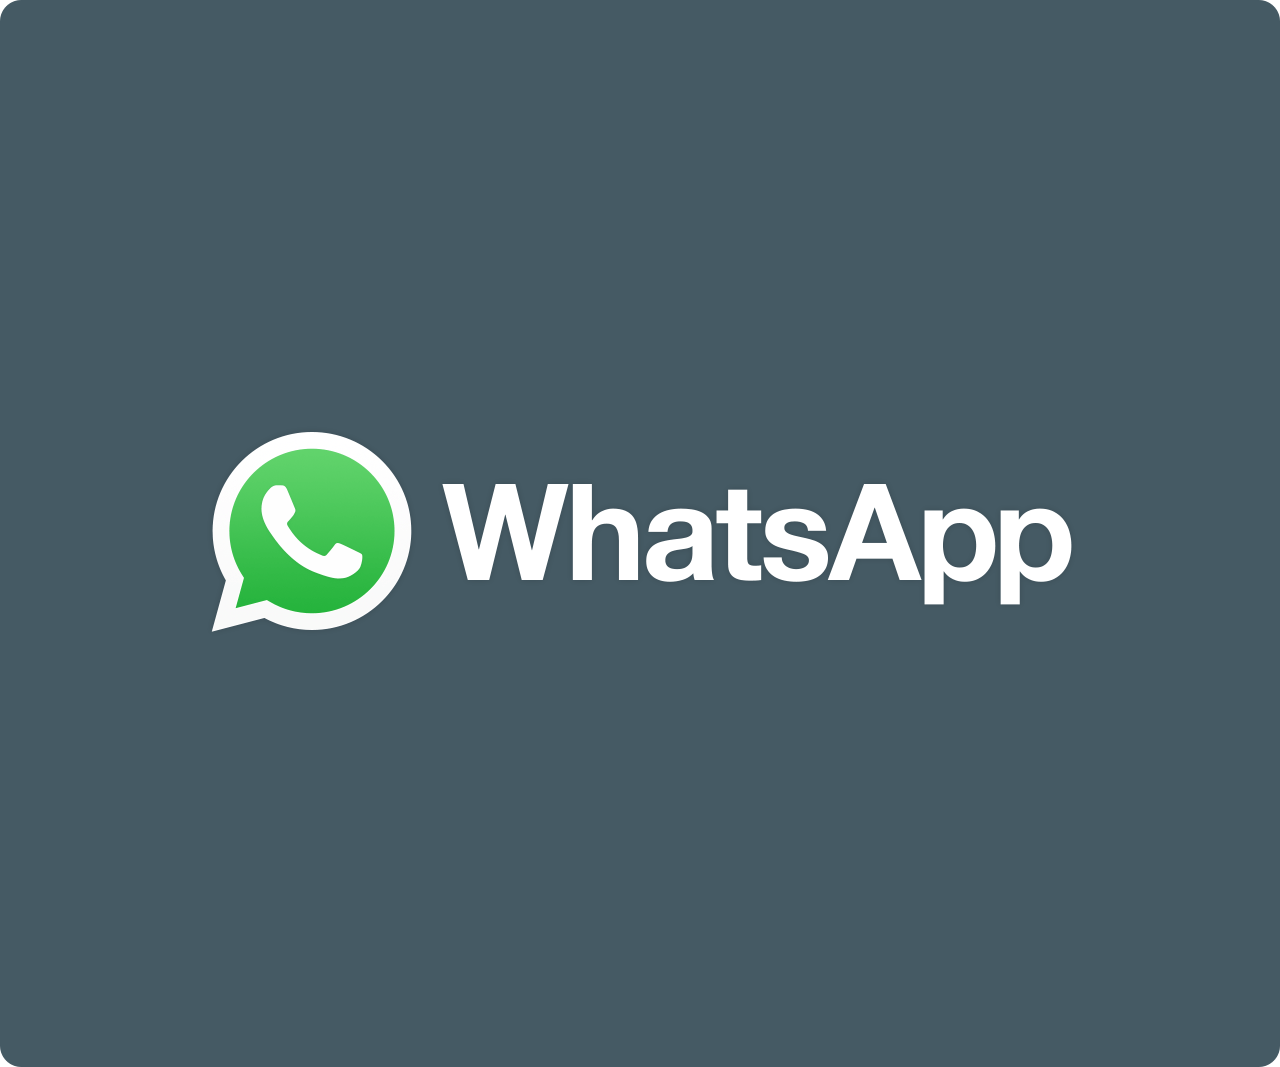 Green Colored Logo - WhatsApp Brand Resources